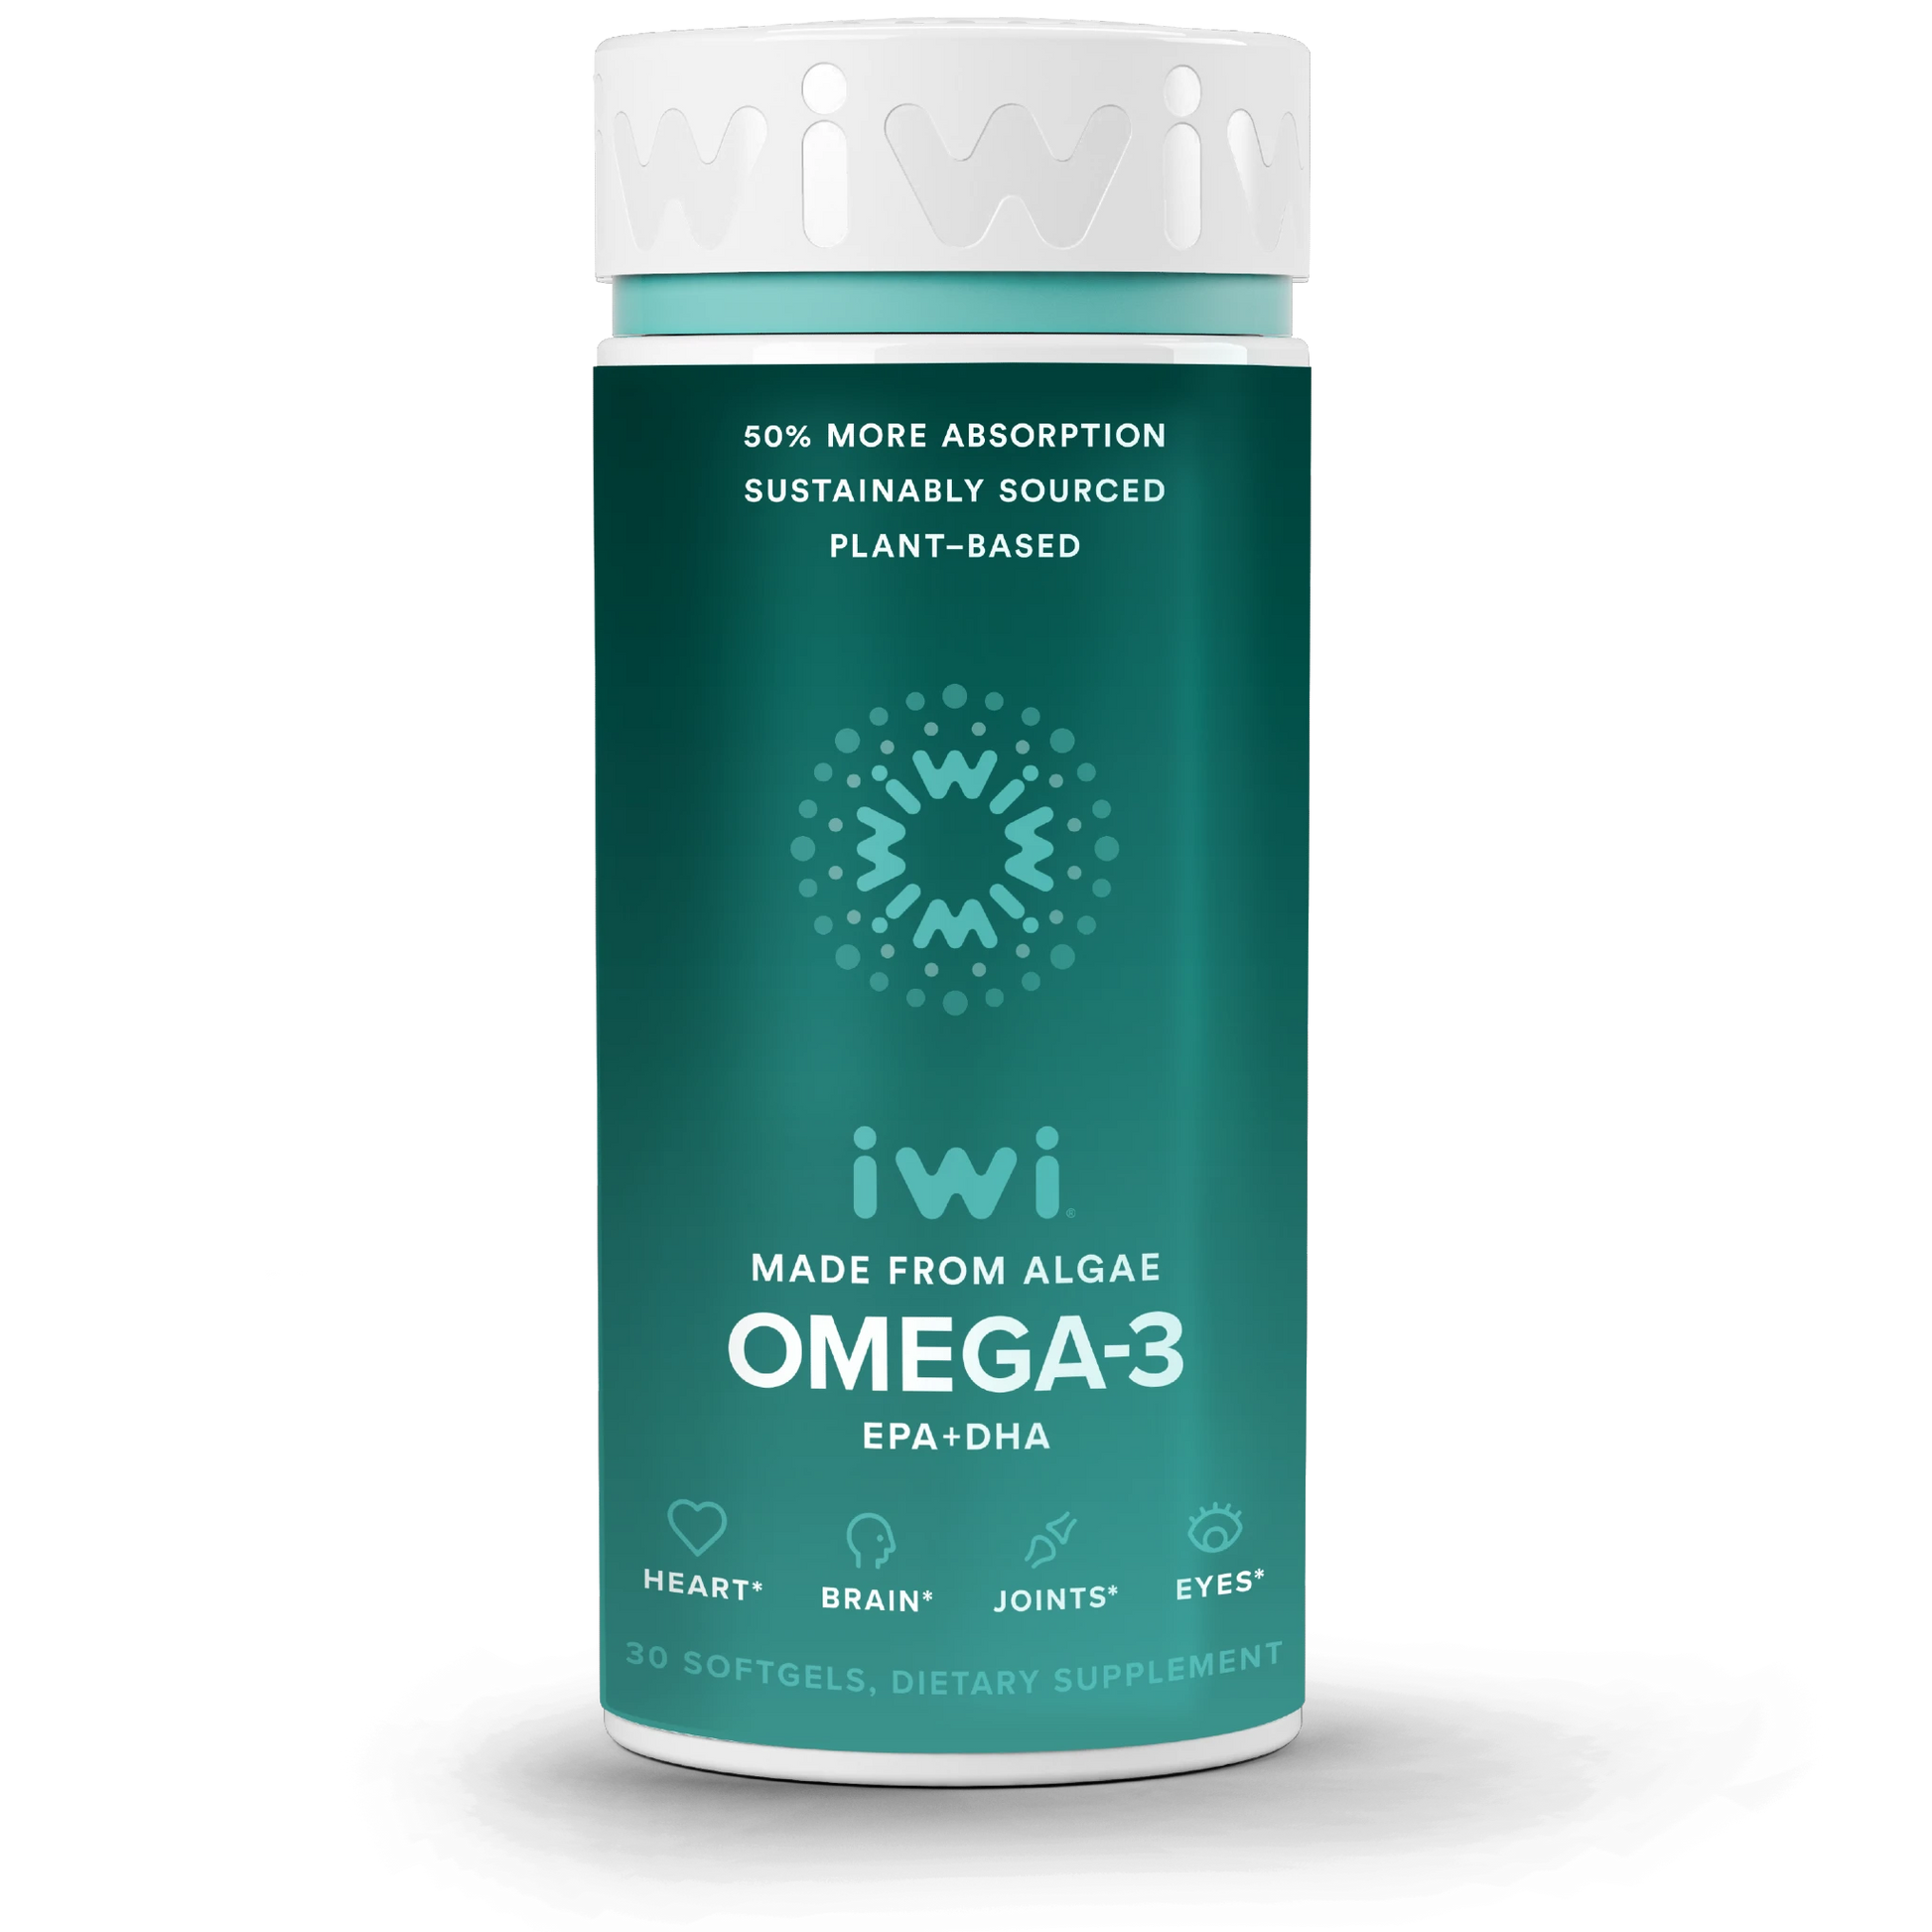 Should You Take Fish Oil Omega-3 For Dry Eyes? – Intelligent Labs